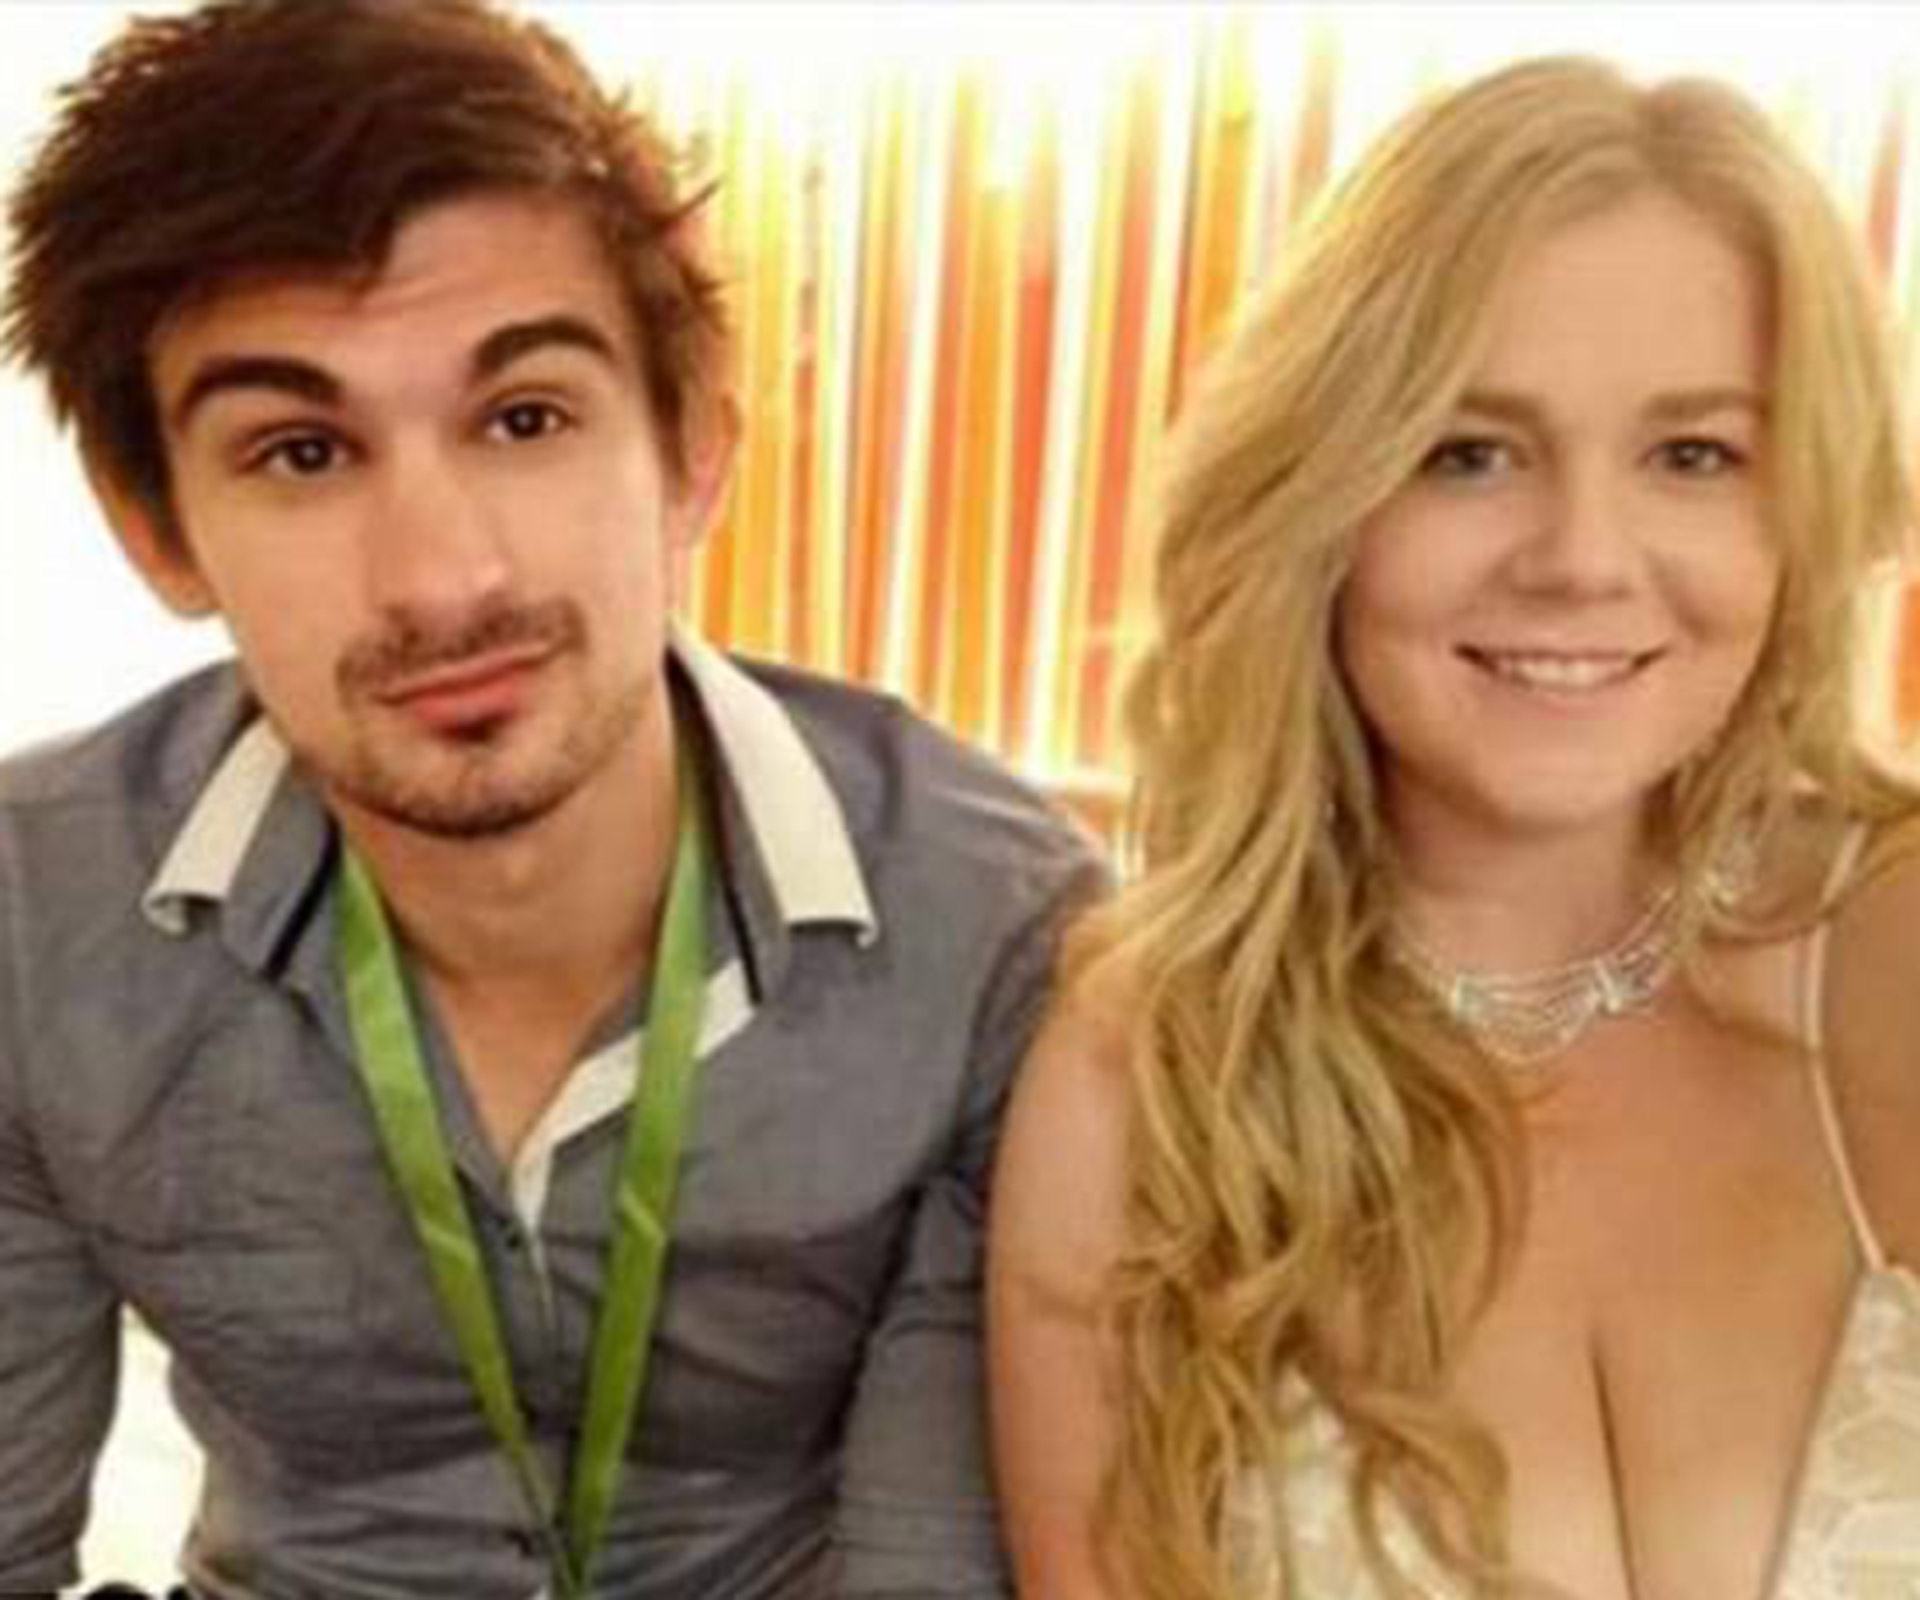 Cassie Sainsbury will plead GUILTY to drug trafficking according to her fiancé 